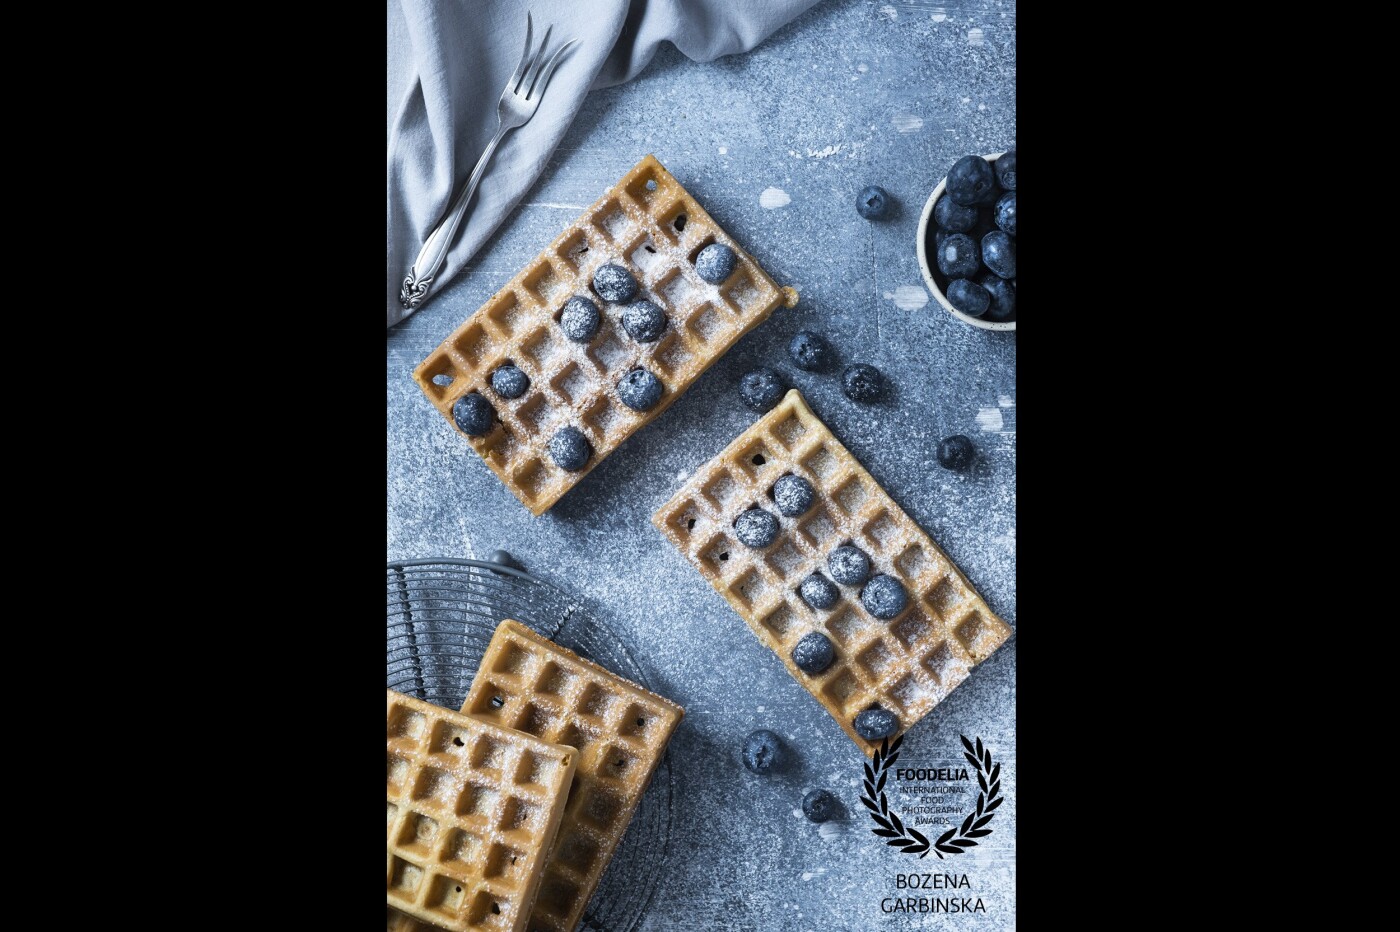 Gluten-free waffles - my first time with this recipe and full success. They tested everyone in my home.<br />
Camera: Fuji X-T3 <br />
Lens: Fujinon 16-55 mm <br />
Settings: ISO 160, 47 mm, f/4.5, 1/50 sec, tripod, daylight